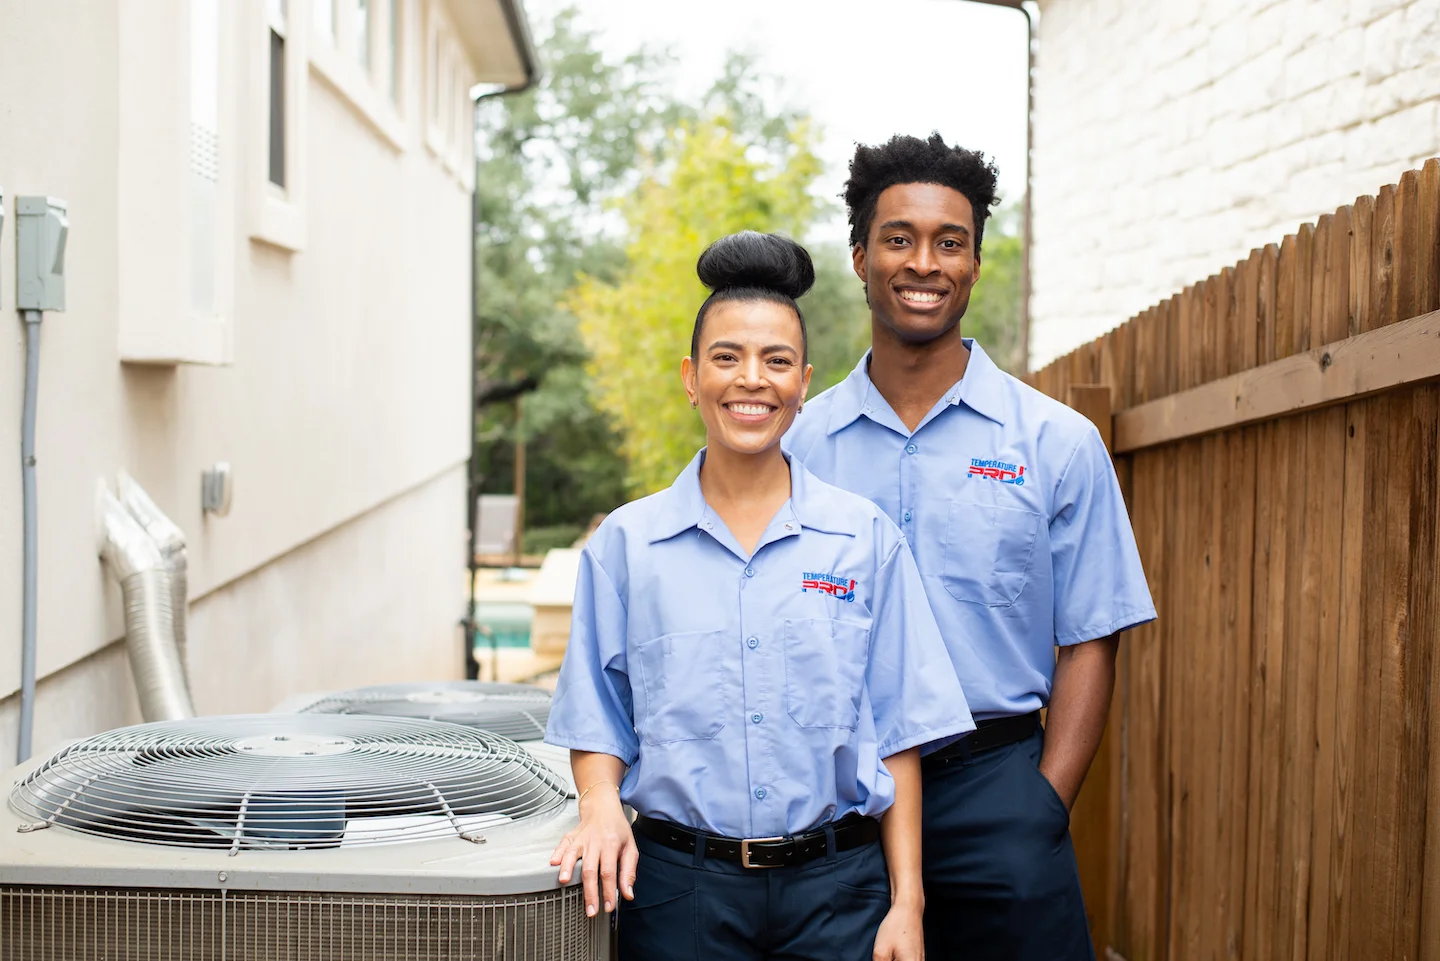 Two AC technicians from Temperature Pro Orlando standing next to an AC condenser.